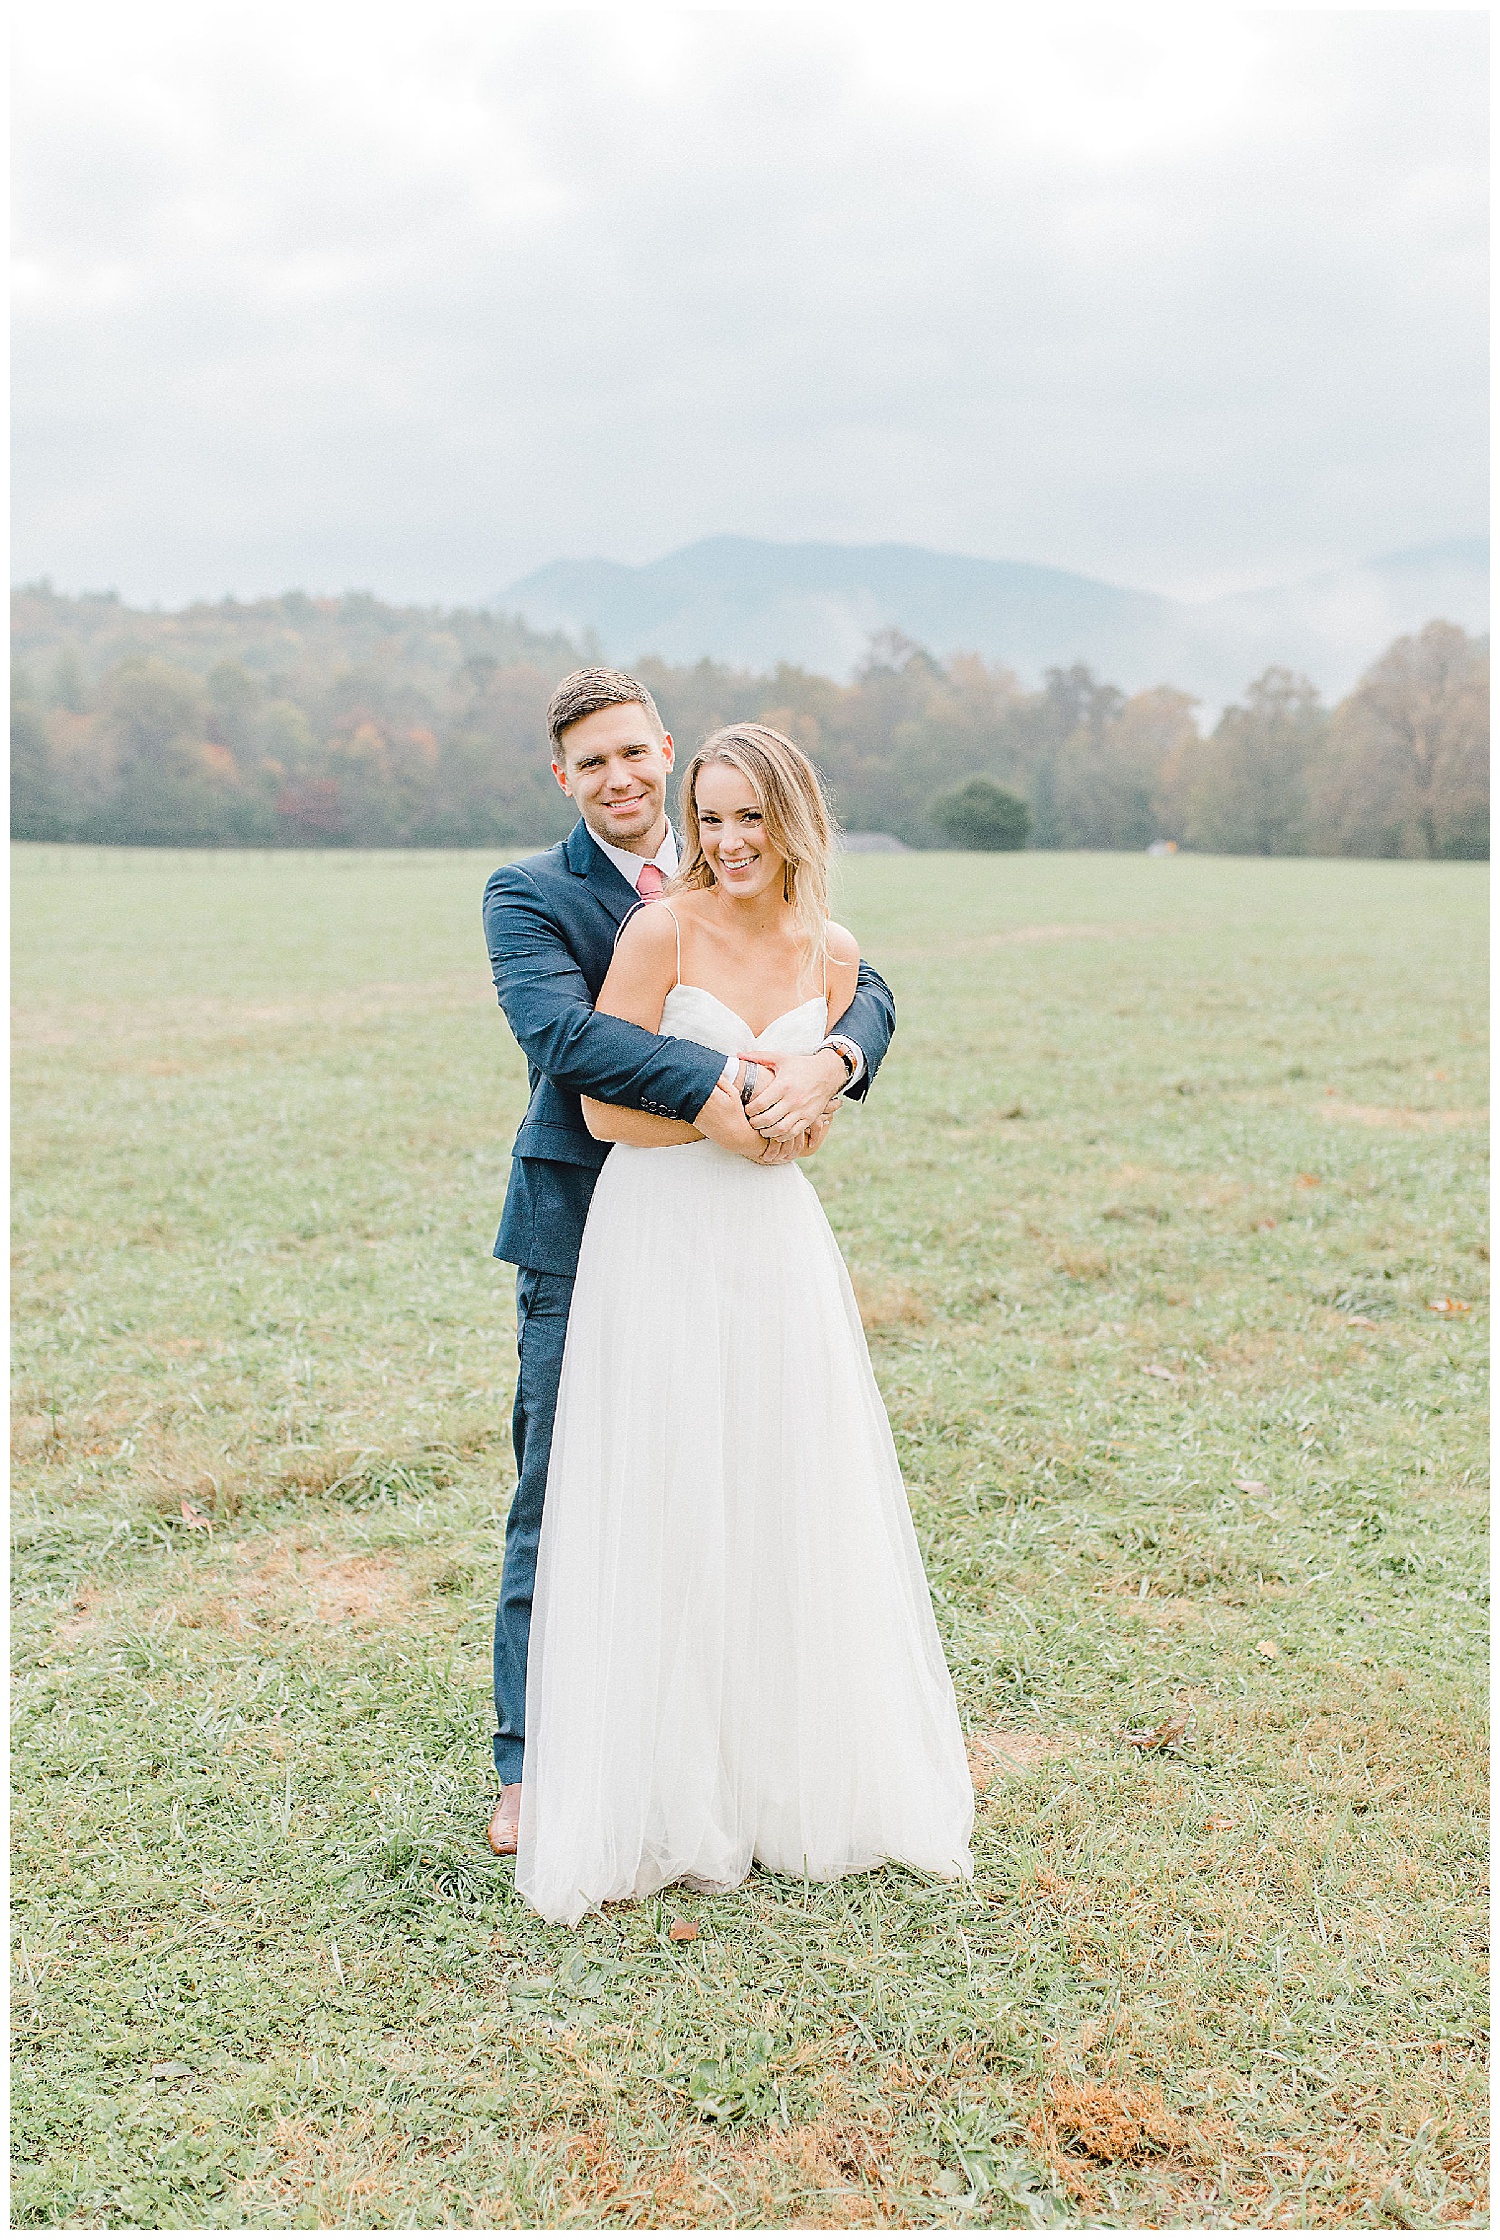 Emma Rose Company recently got to travel all the way to Nashville to photograph the most beautiful post-wedding bride and groom portraits in the Great Smoky Mountains with a gorgeous couple! Nashville wedding inspiration at it's finest._0030.jpg